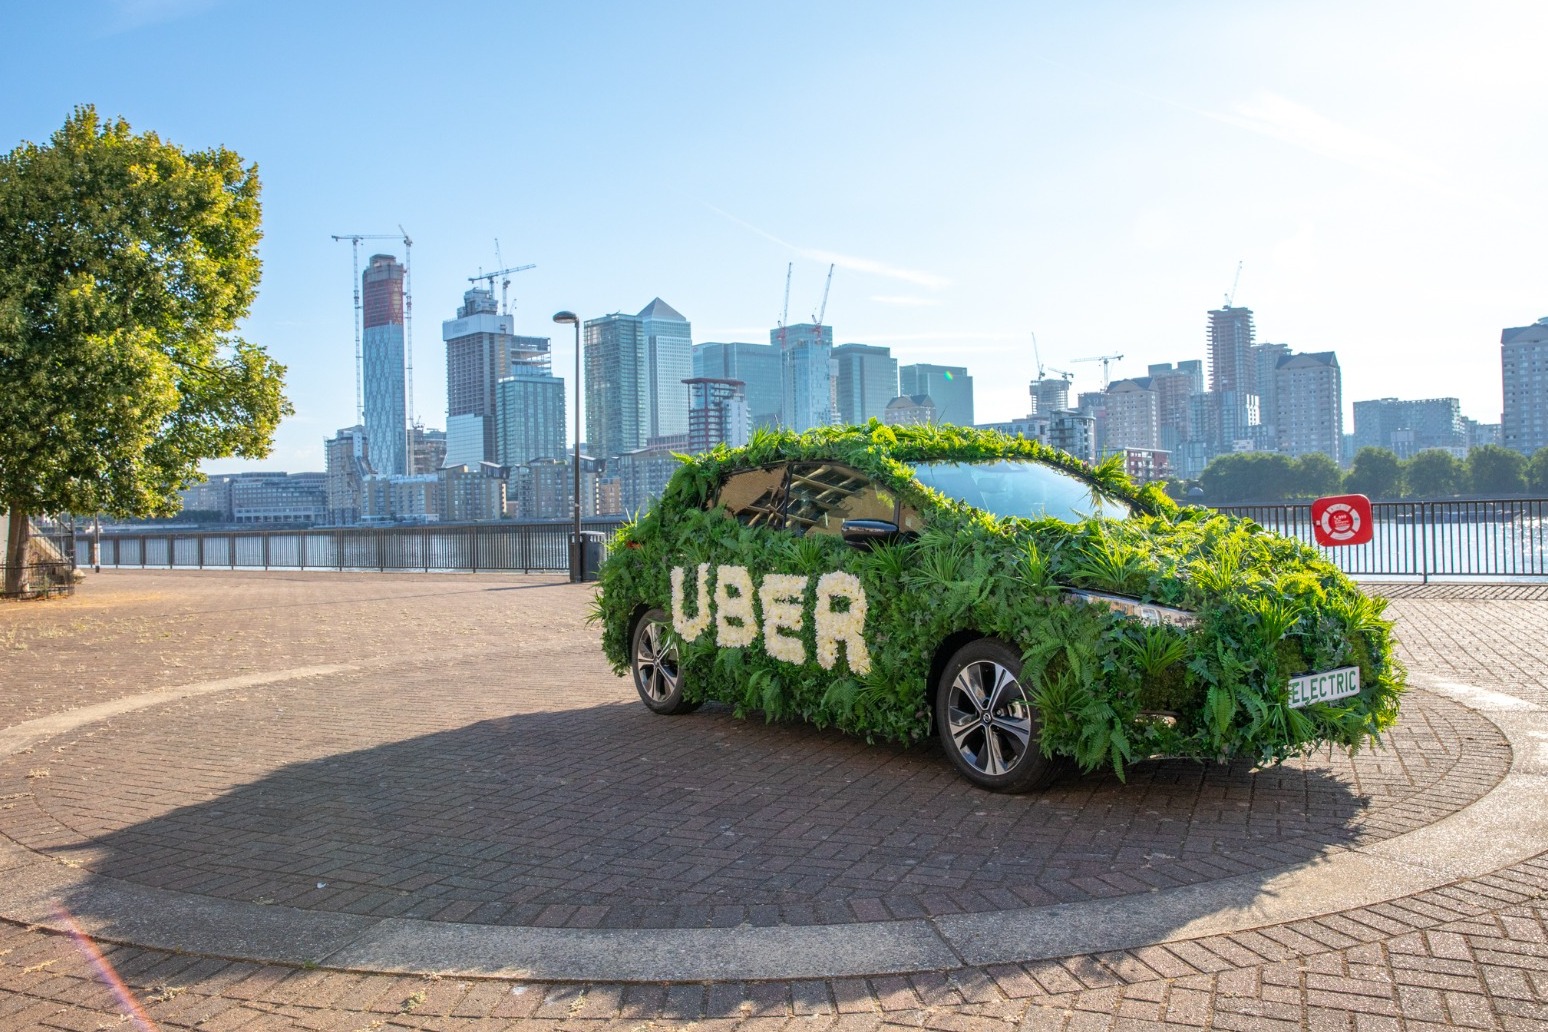 All Uber Eats couriers to use zero emission vehicles by 2040 